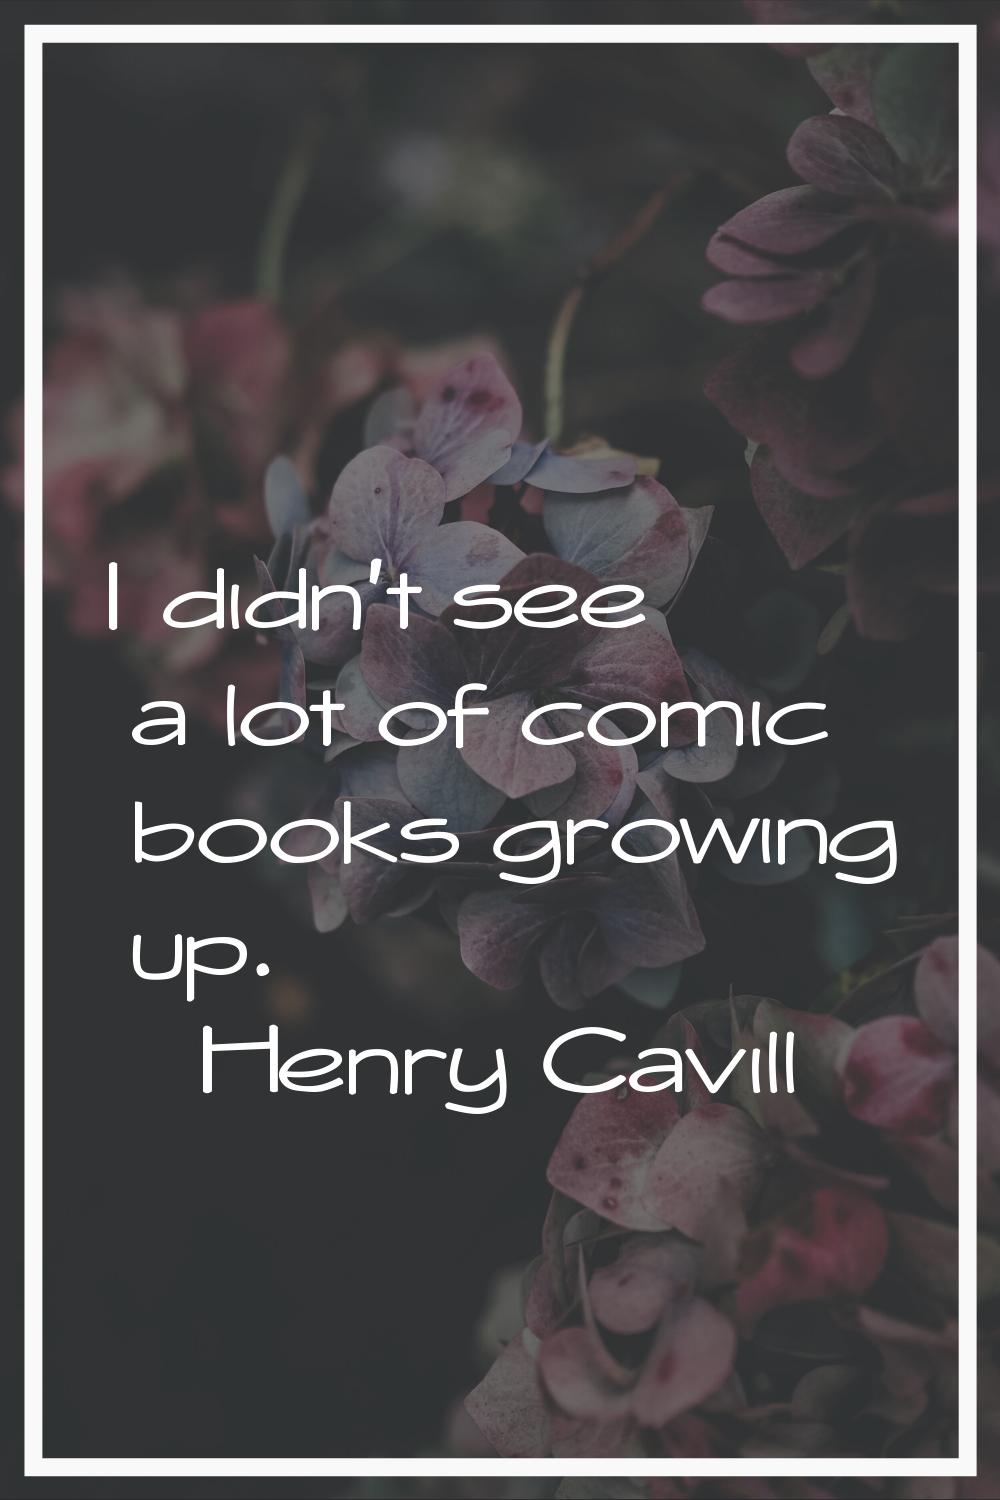 I didn't see a lot of comic books growing up.